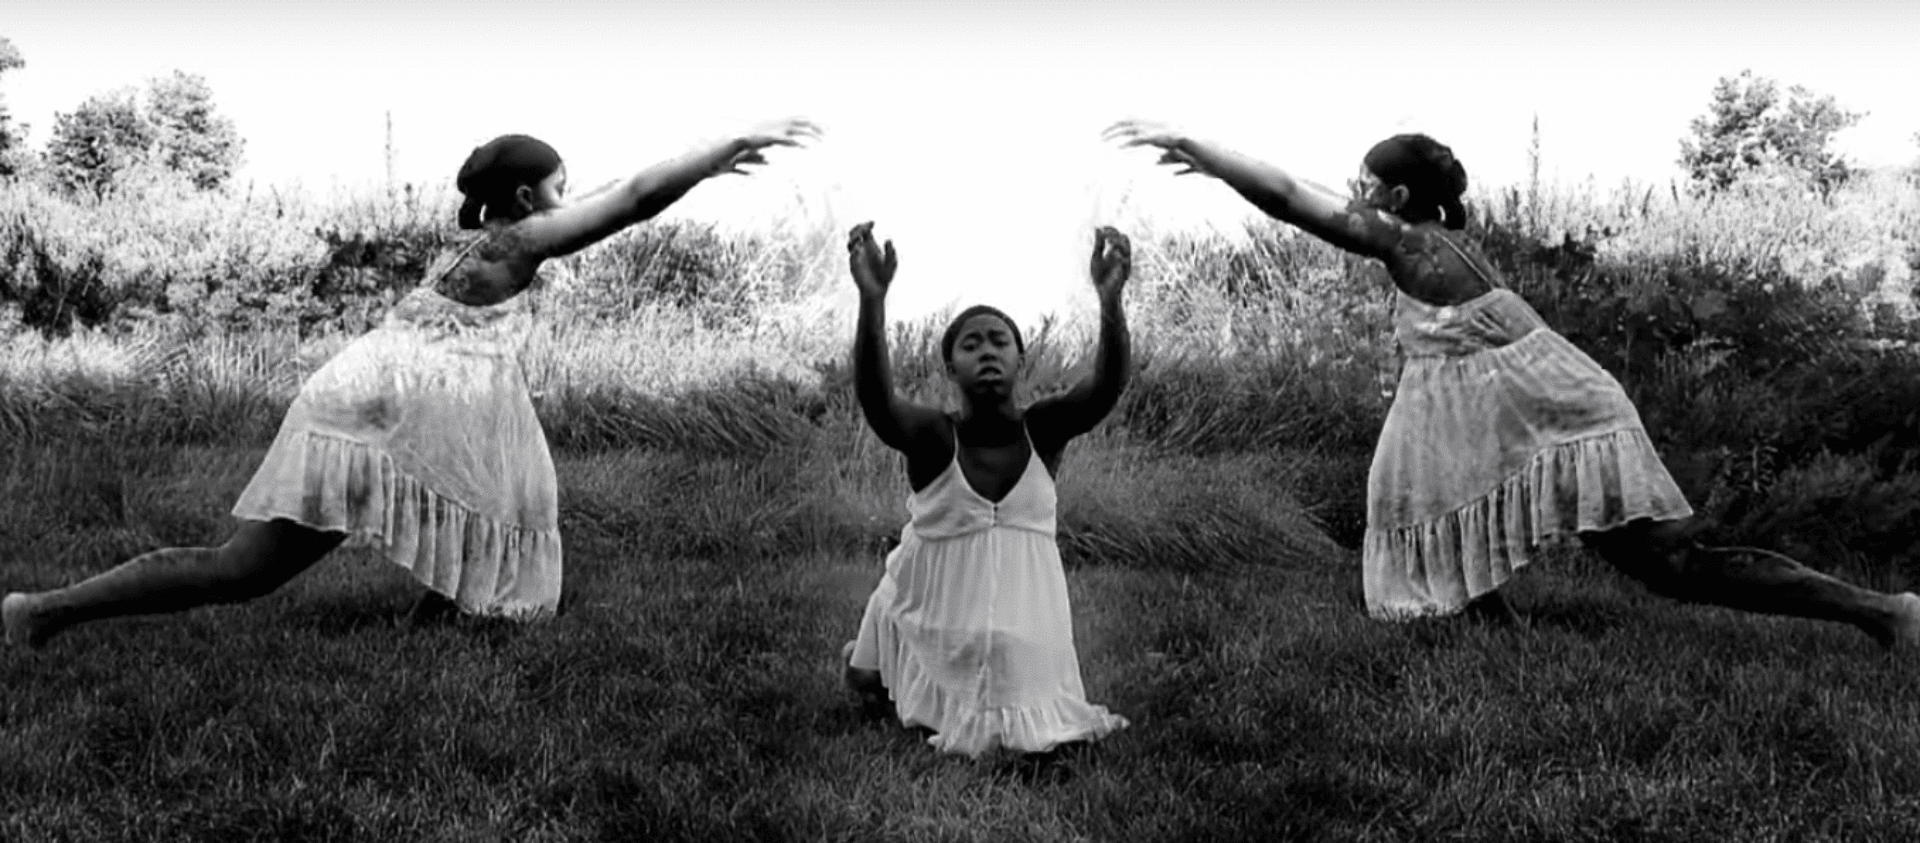 Photo of three women dancing by Shanita Mitchell for The AutoEthnographer